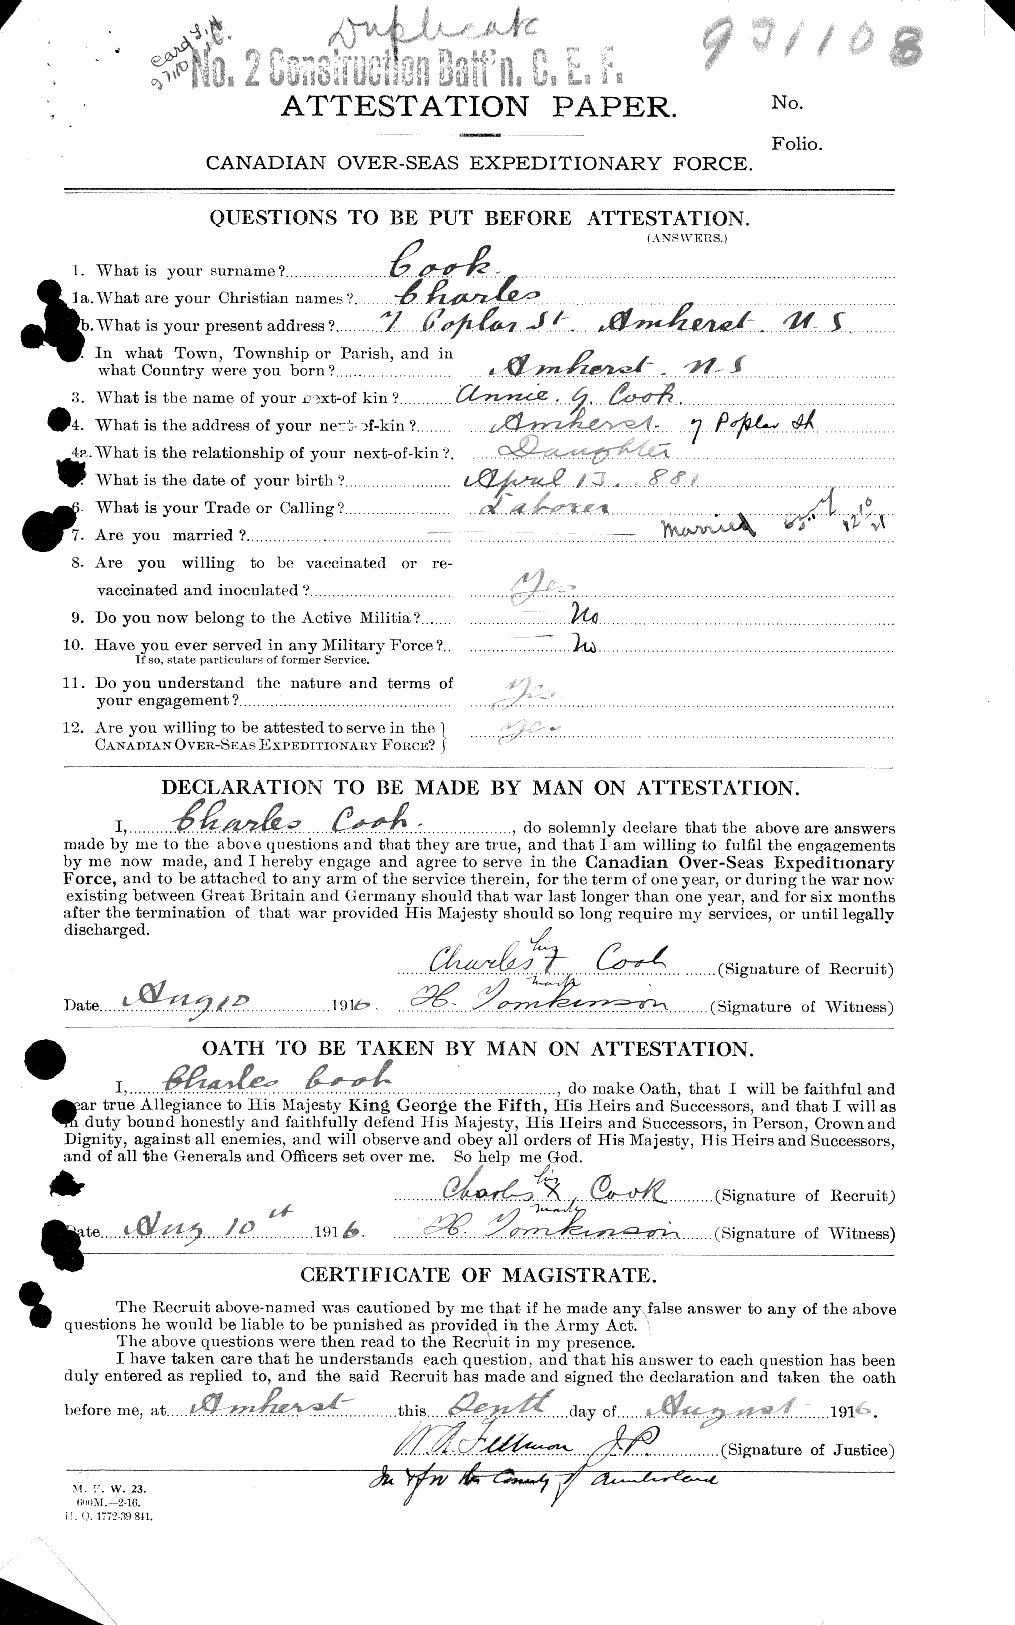 Personnel Records of the First World War - CEF 041222a